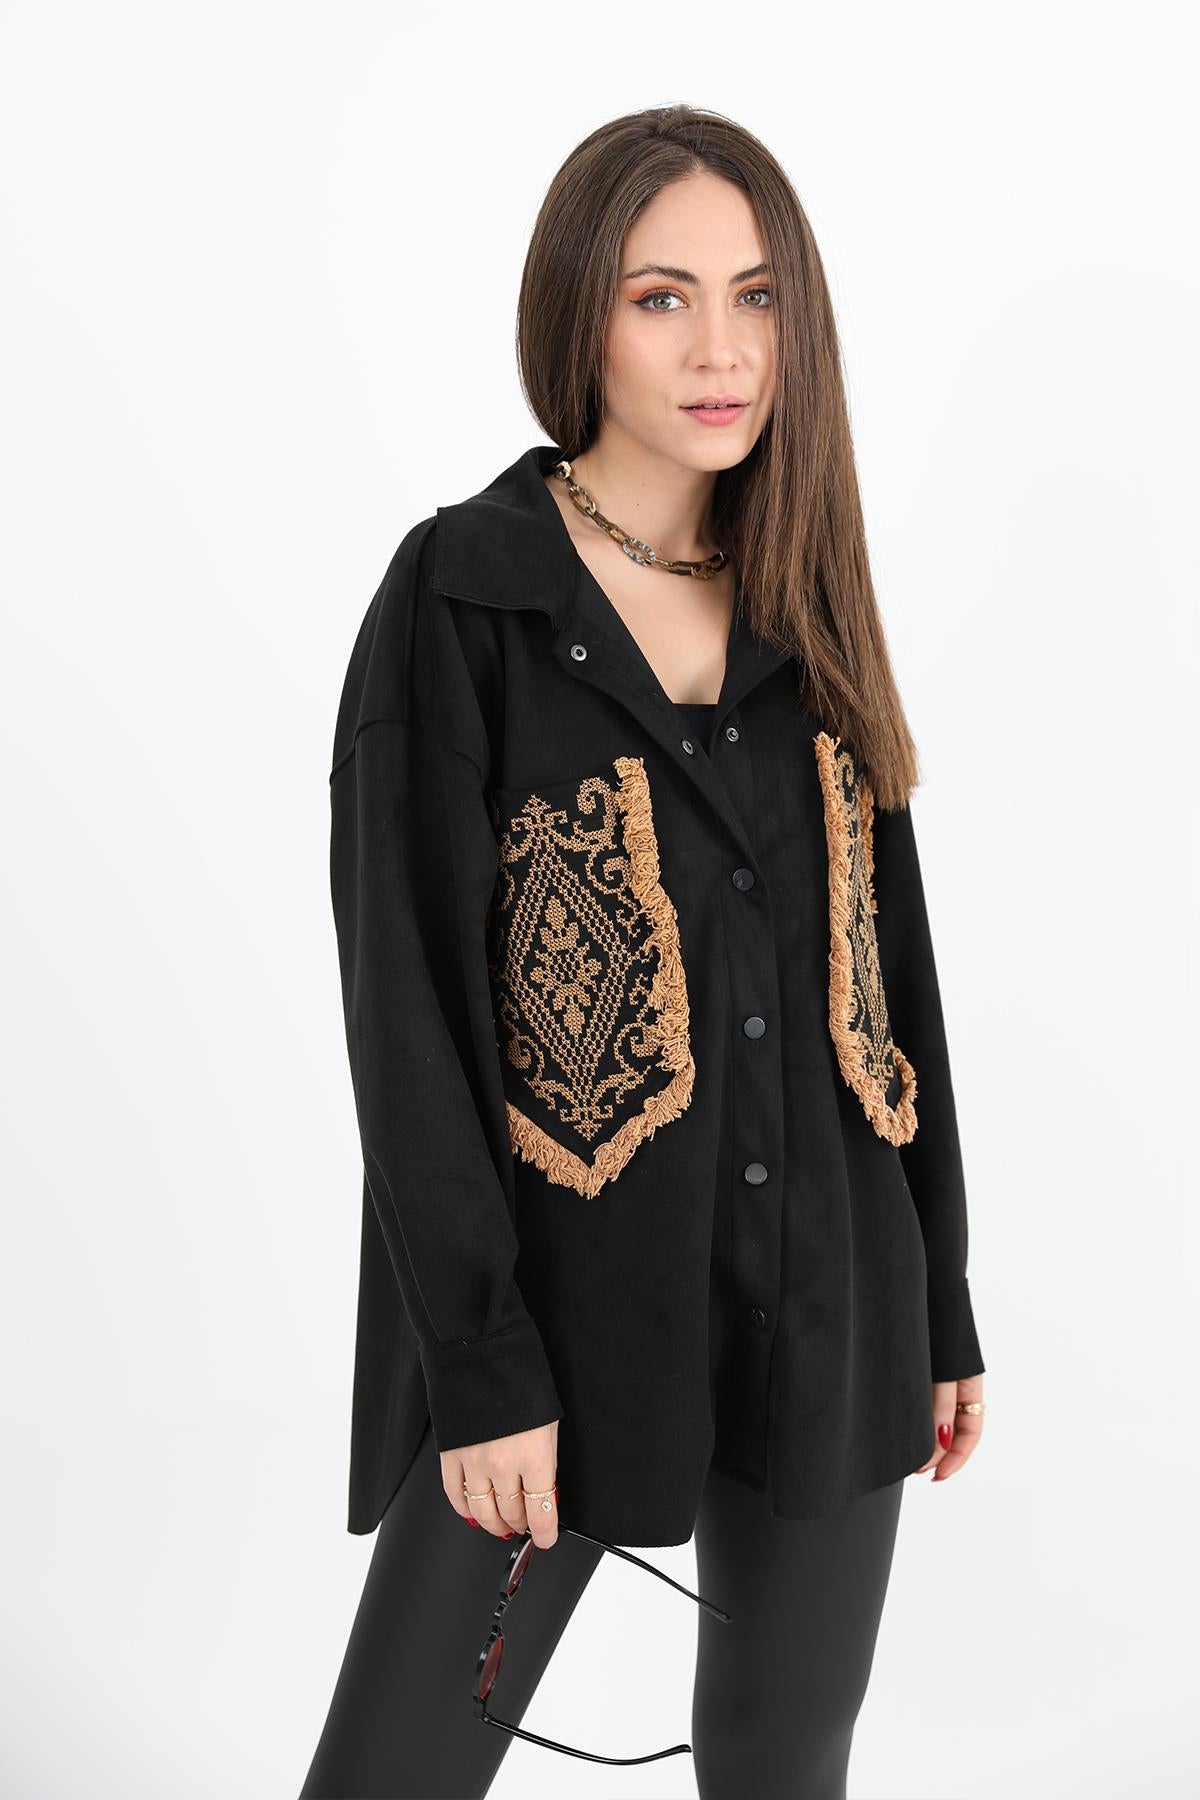 Women's Shirt Pocket Tasseled Embroidered Suede - Black - STREETMODE ™